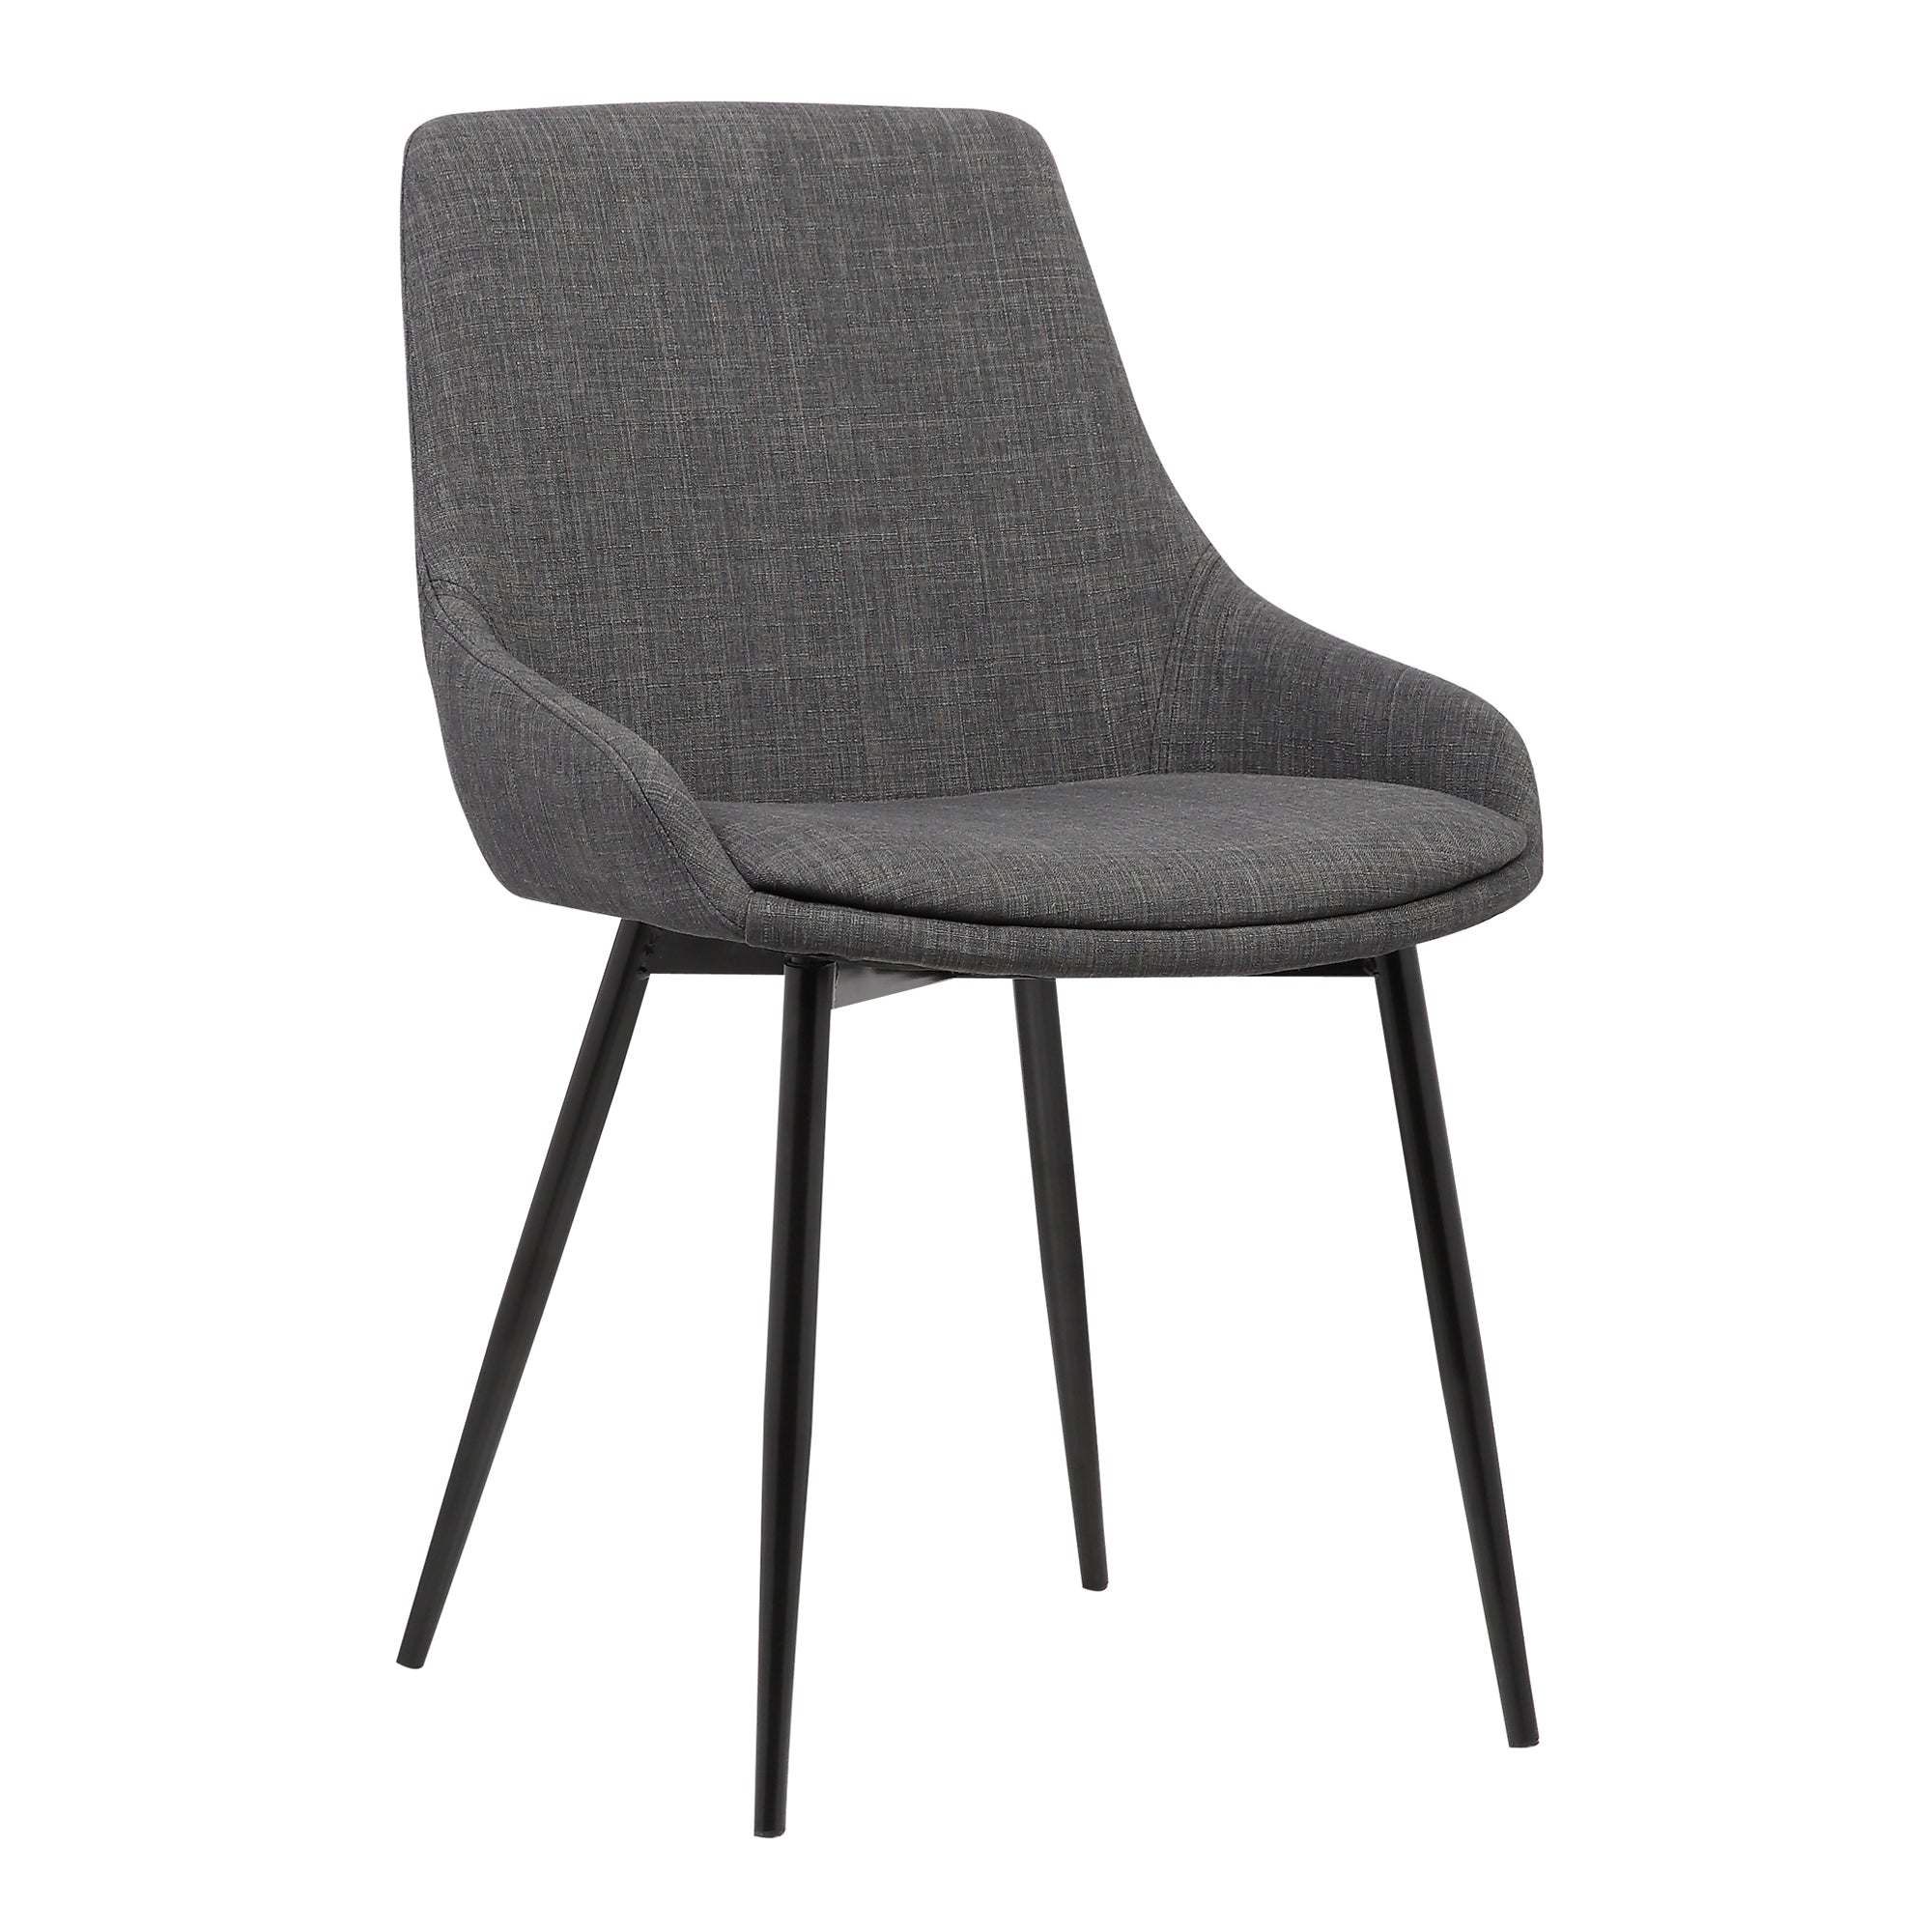 Armen Living Lcmichch Mia Contemporary Dining Chair In Charcoal Fabric With Black Powder Coated Metal Legs